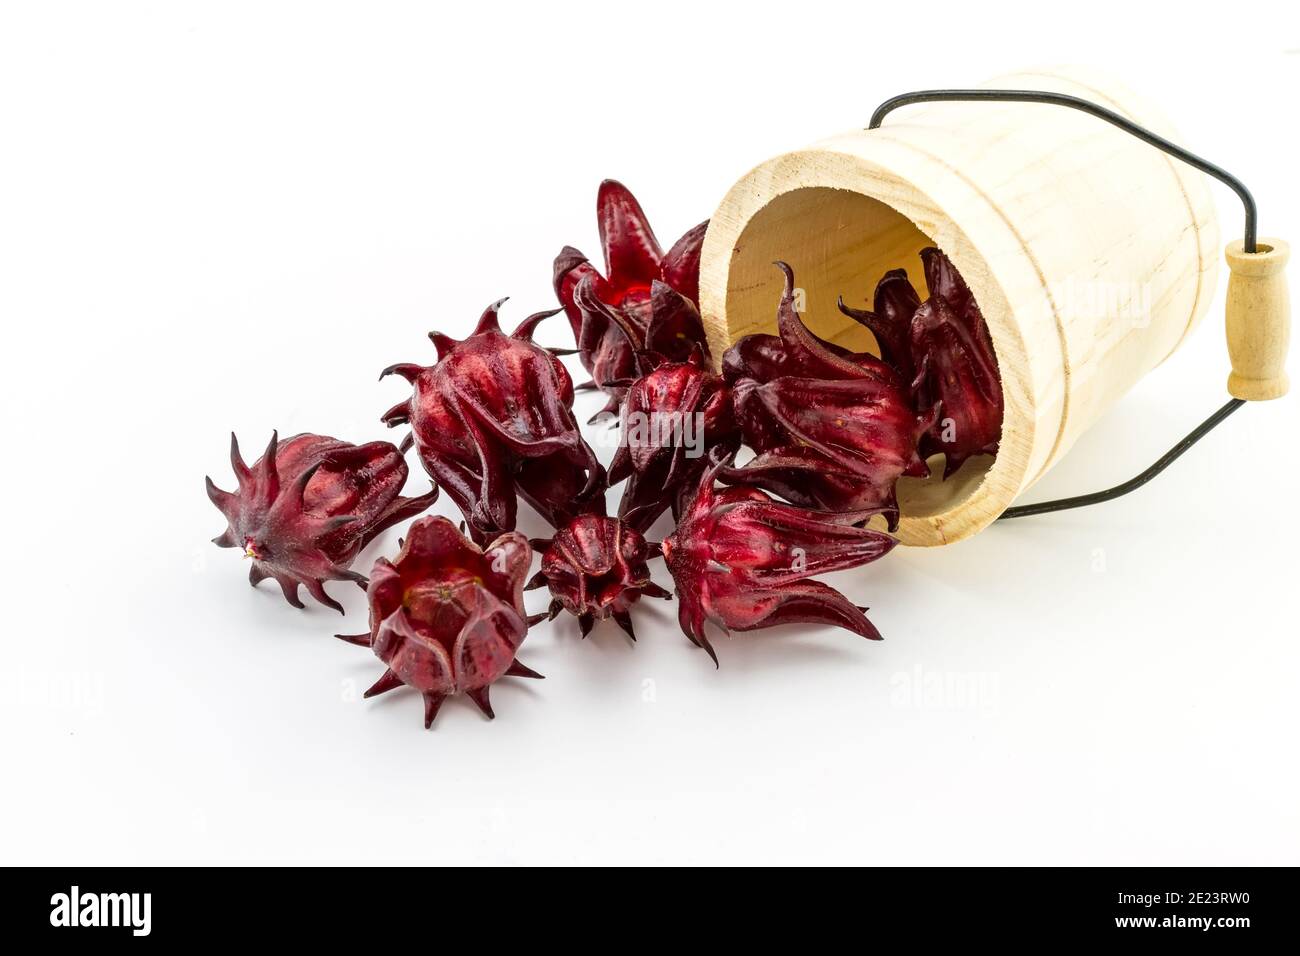 Hibiscus sabdariffa or roselle fruits in wooden box  on white background. Stock Photo